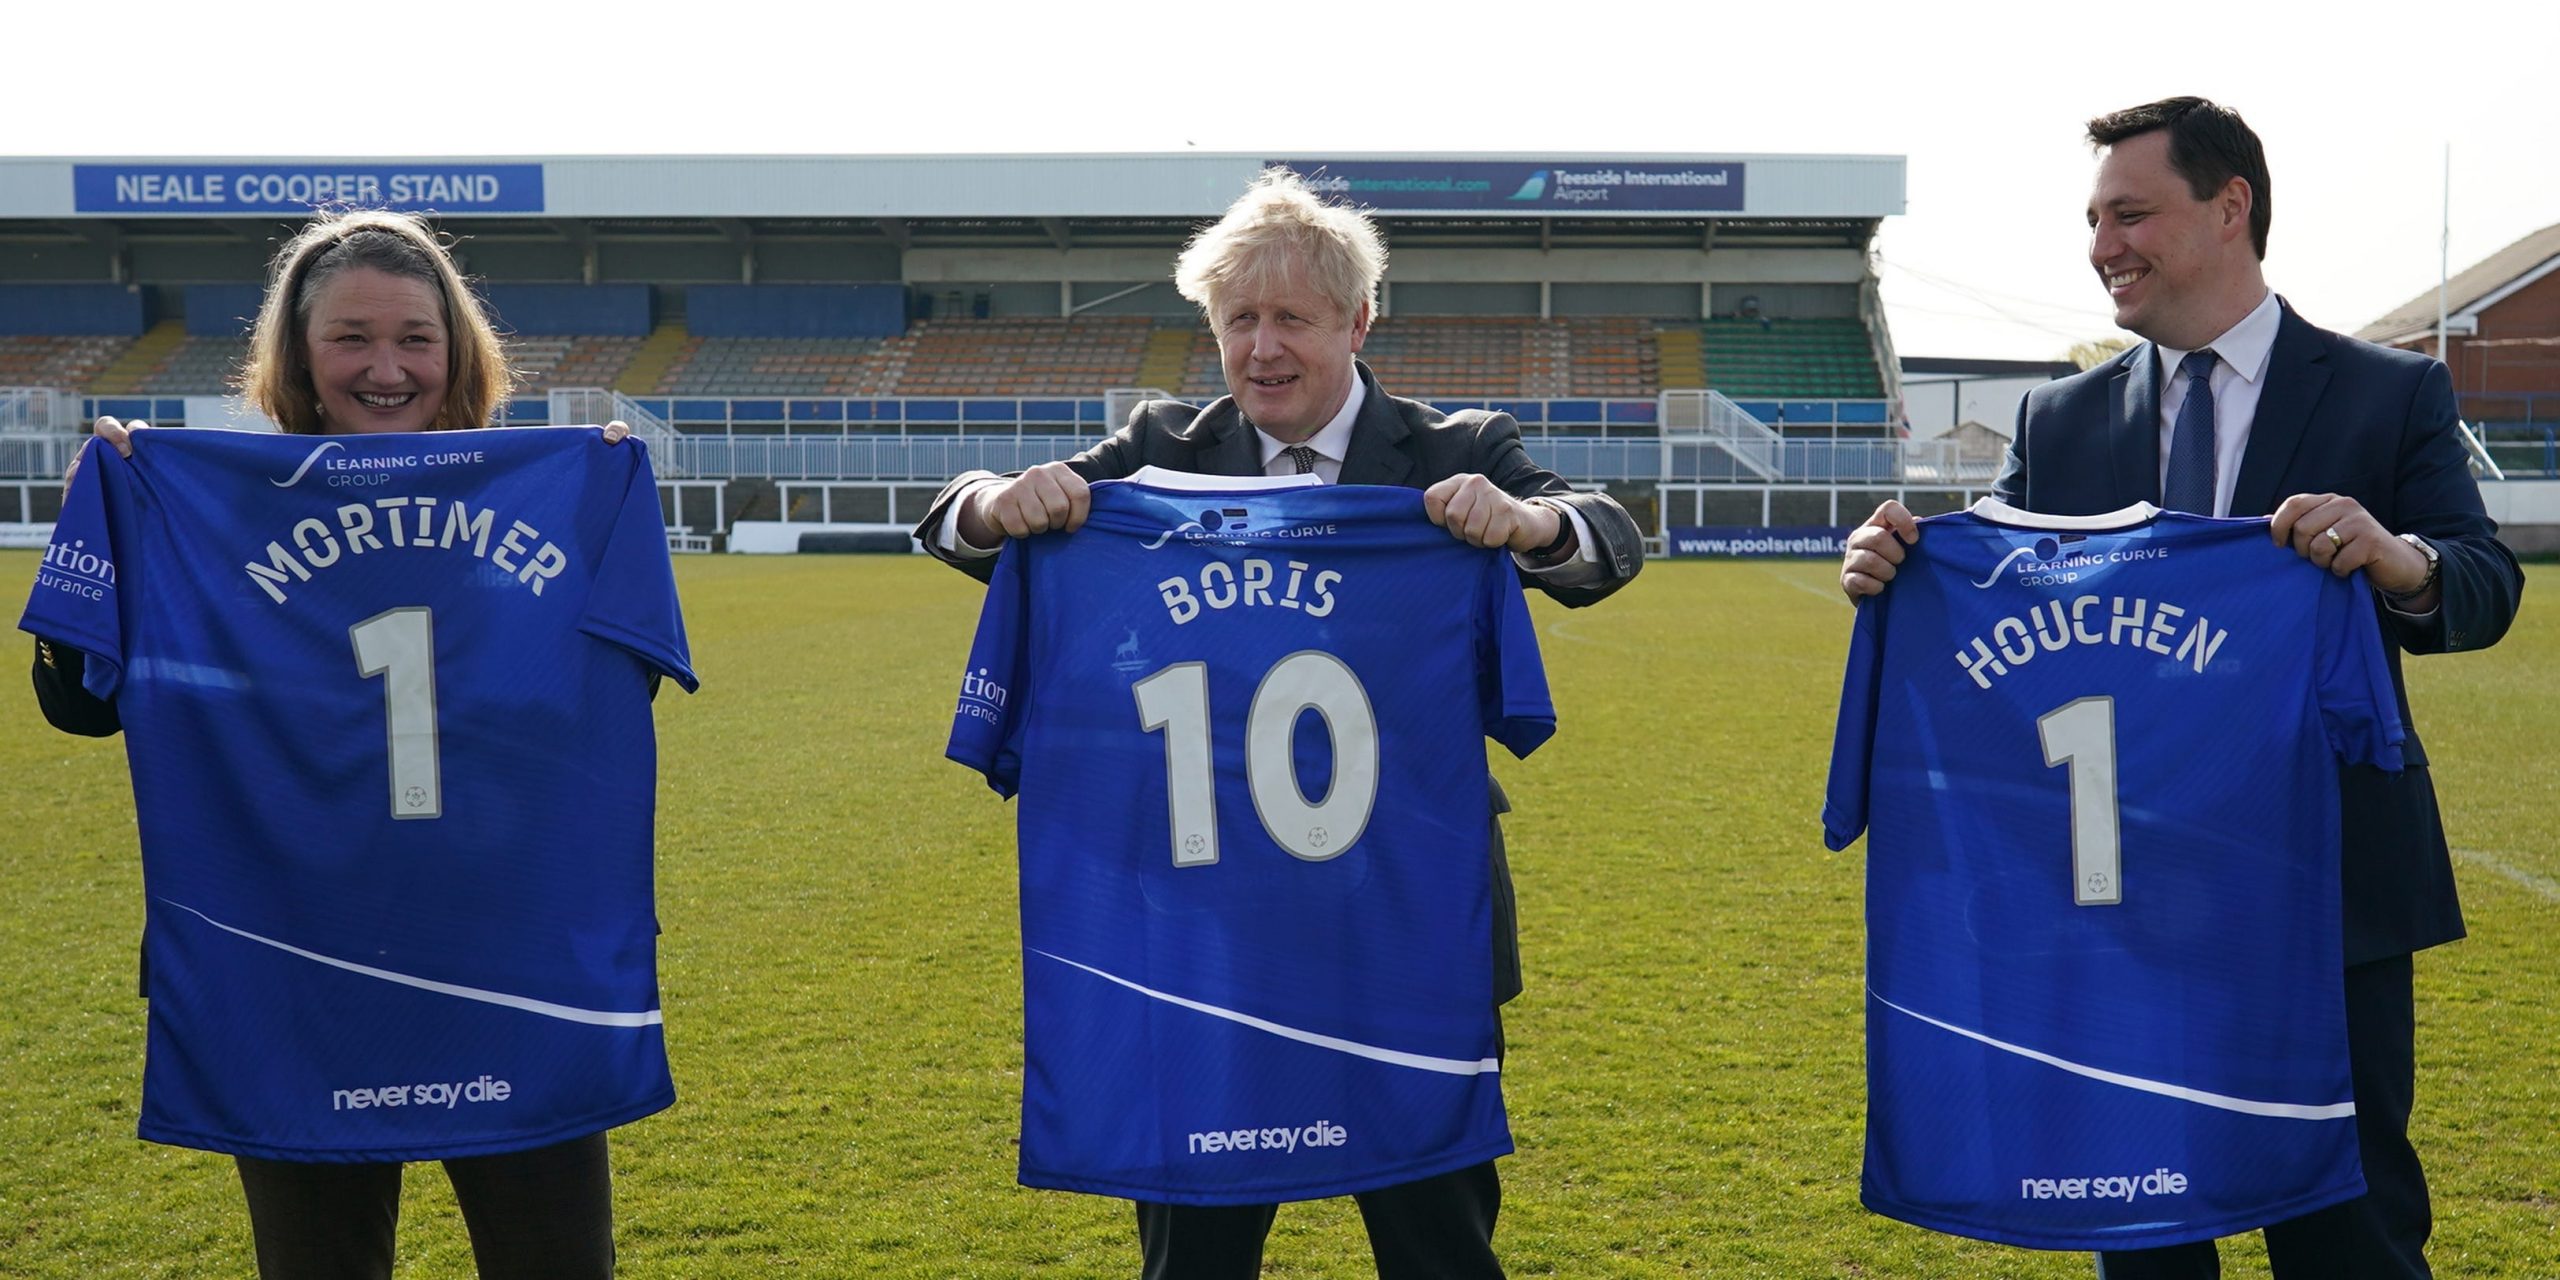 Jill Mortimer holds a football t-shirt with her surname and the number 1; Boris Johnson the same with a shirt with the number 10; Ben Houchen the same with a number 1.